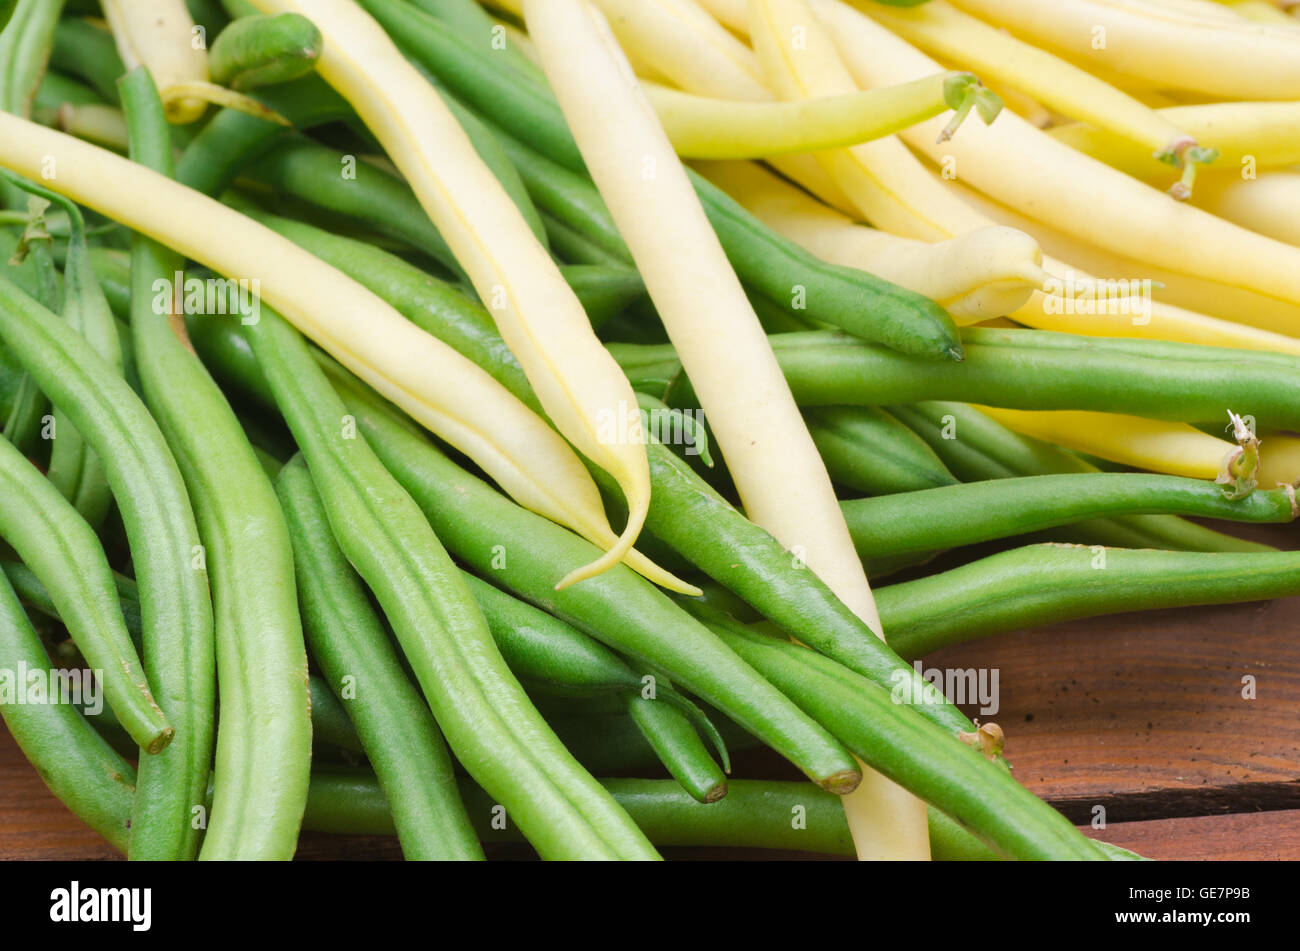 green and yellow bean on wooden table Stock Photo